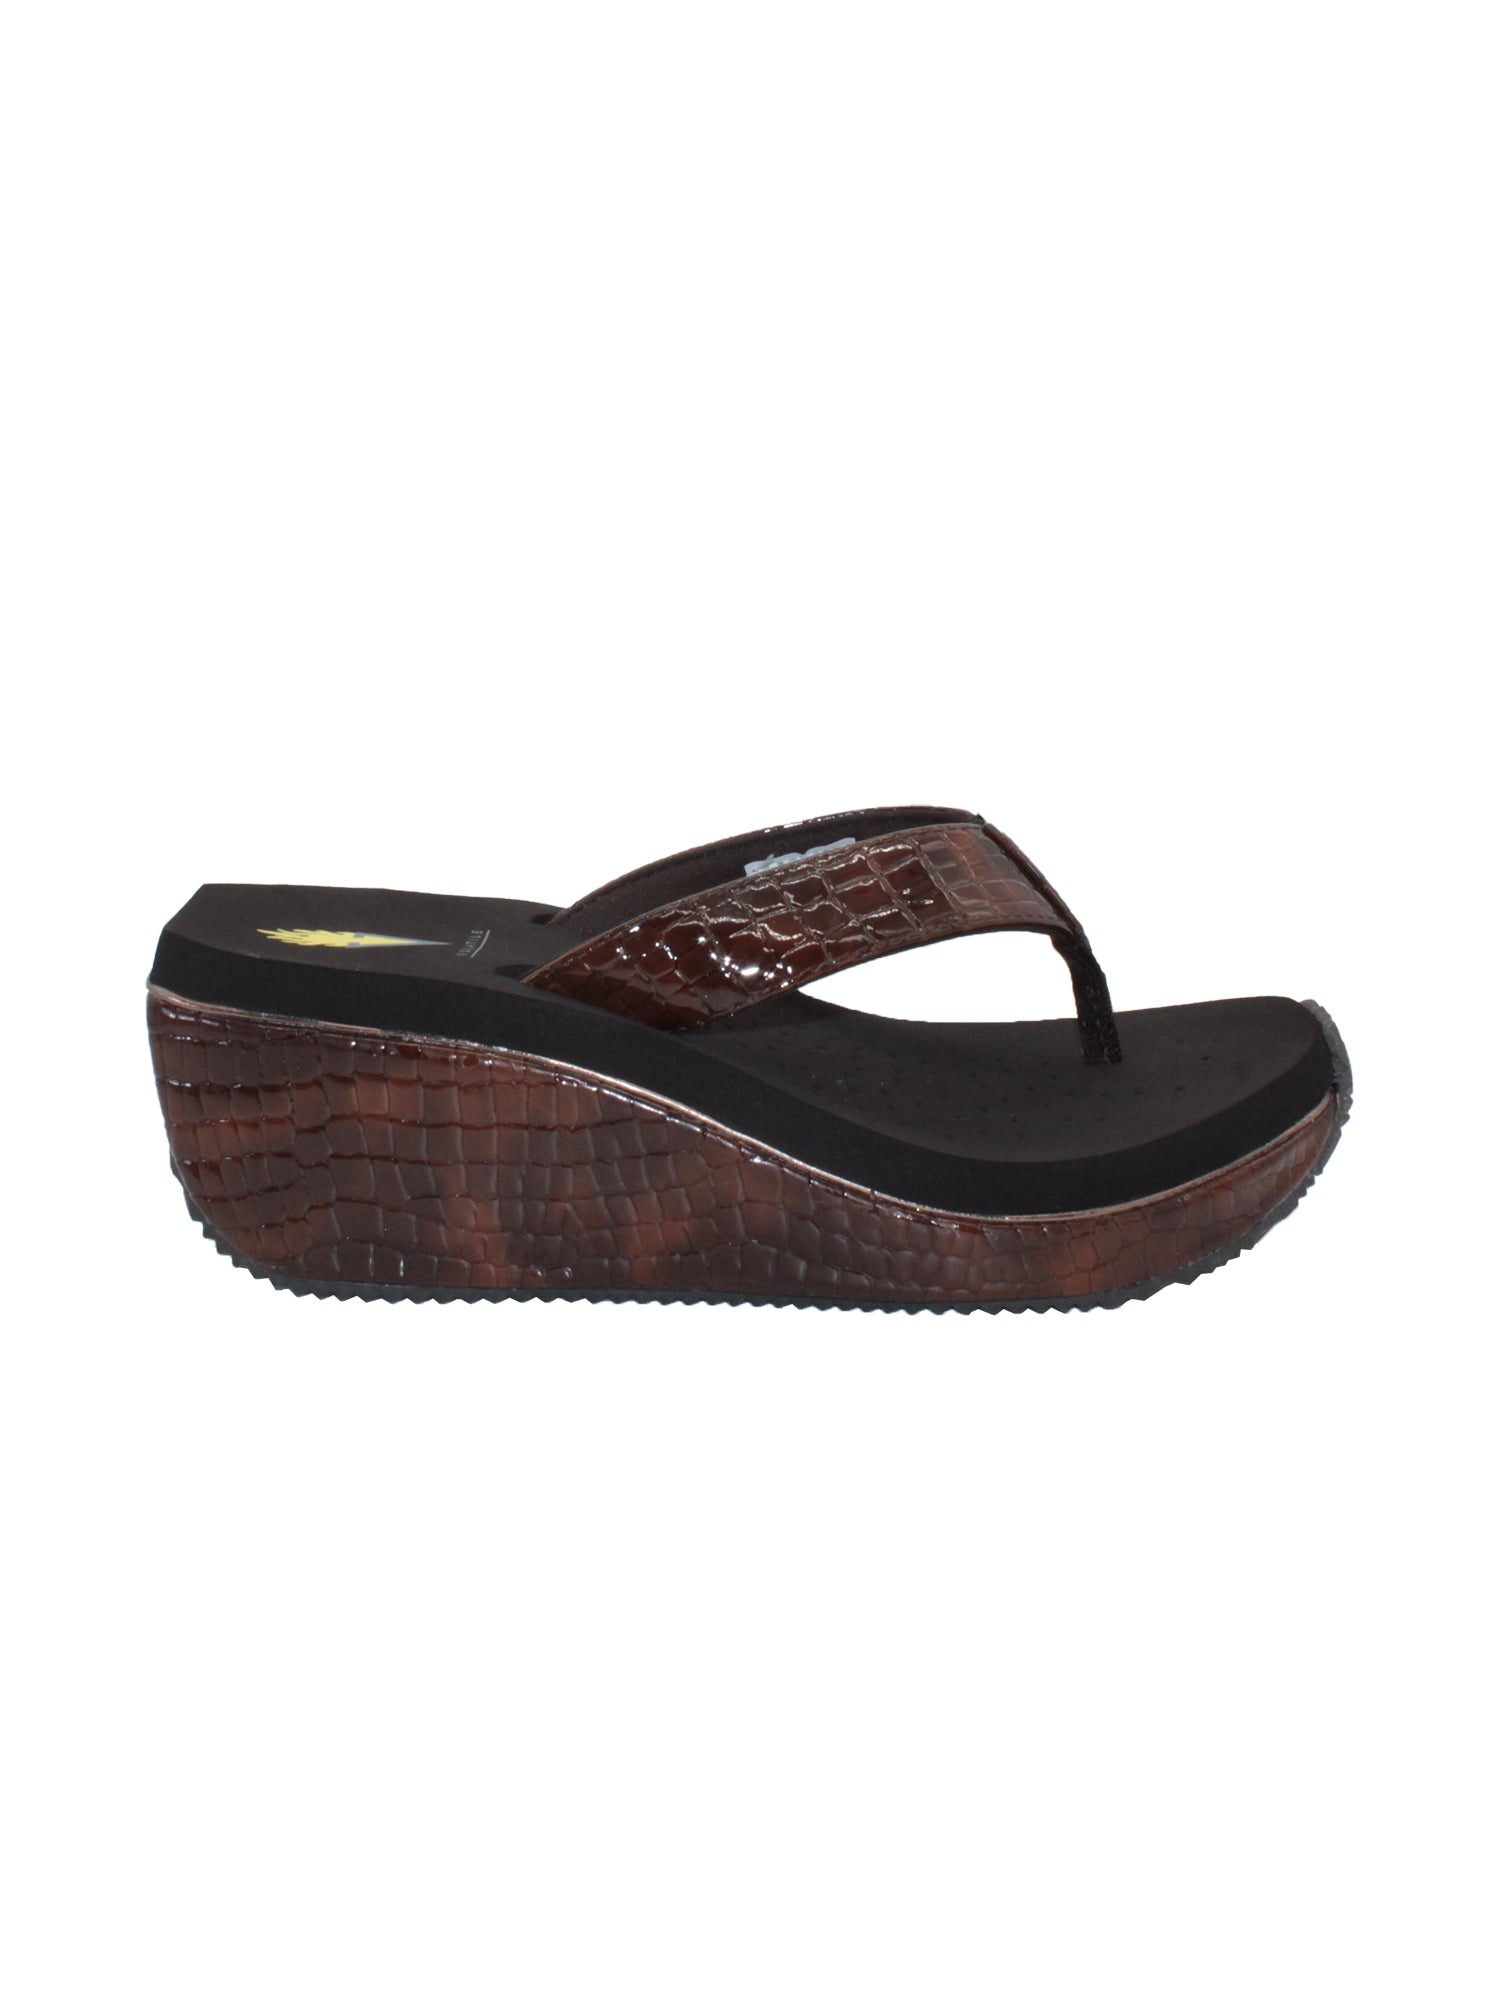  Volatile’s bestselling Frappachino wedge sandal is a style that transcends the trends and is available in our classic black and brown genuine leather versions, or, in this season’s new metallic embossed snake print for a fresh update. They feature Volatile’s signature ultra comfort EVA insole for all day comfort. brown croco 